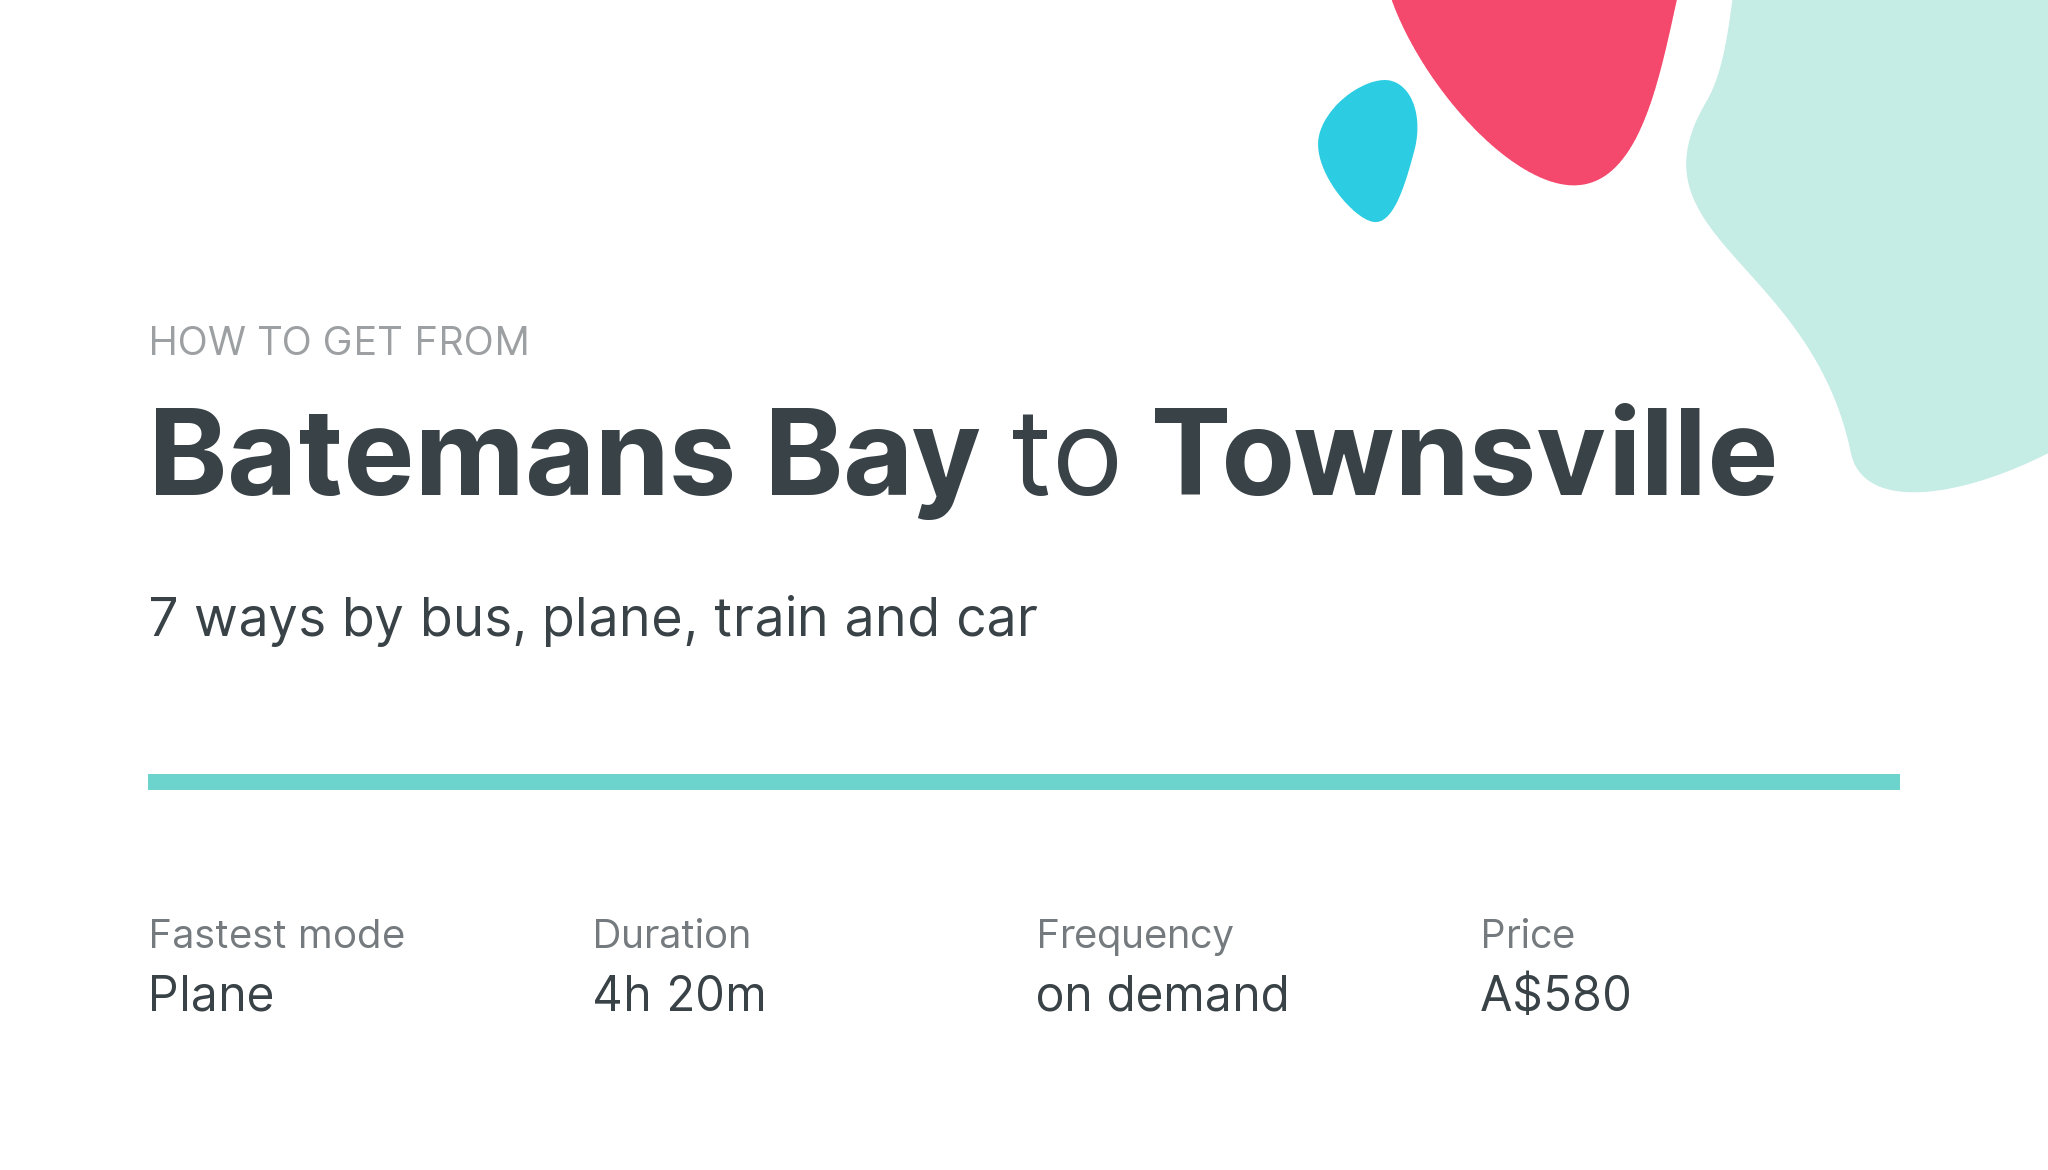 How do I get from Batemans Bay to Townsville